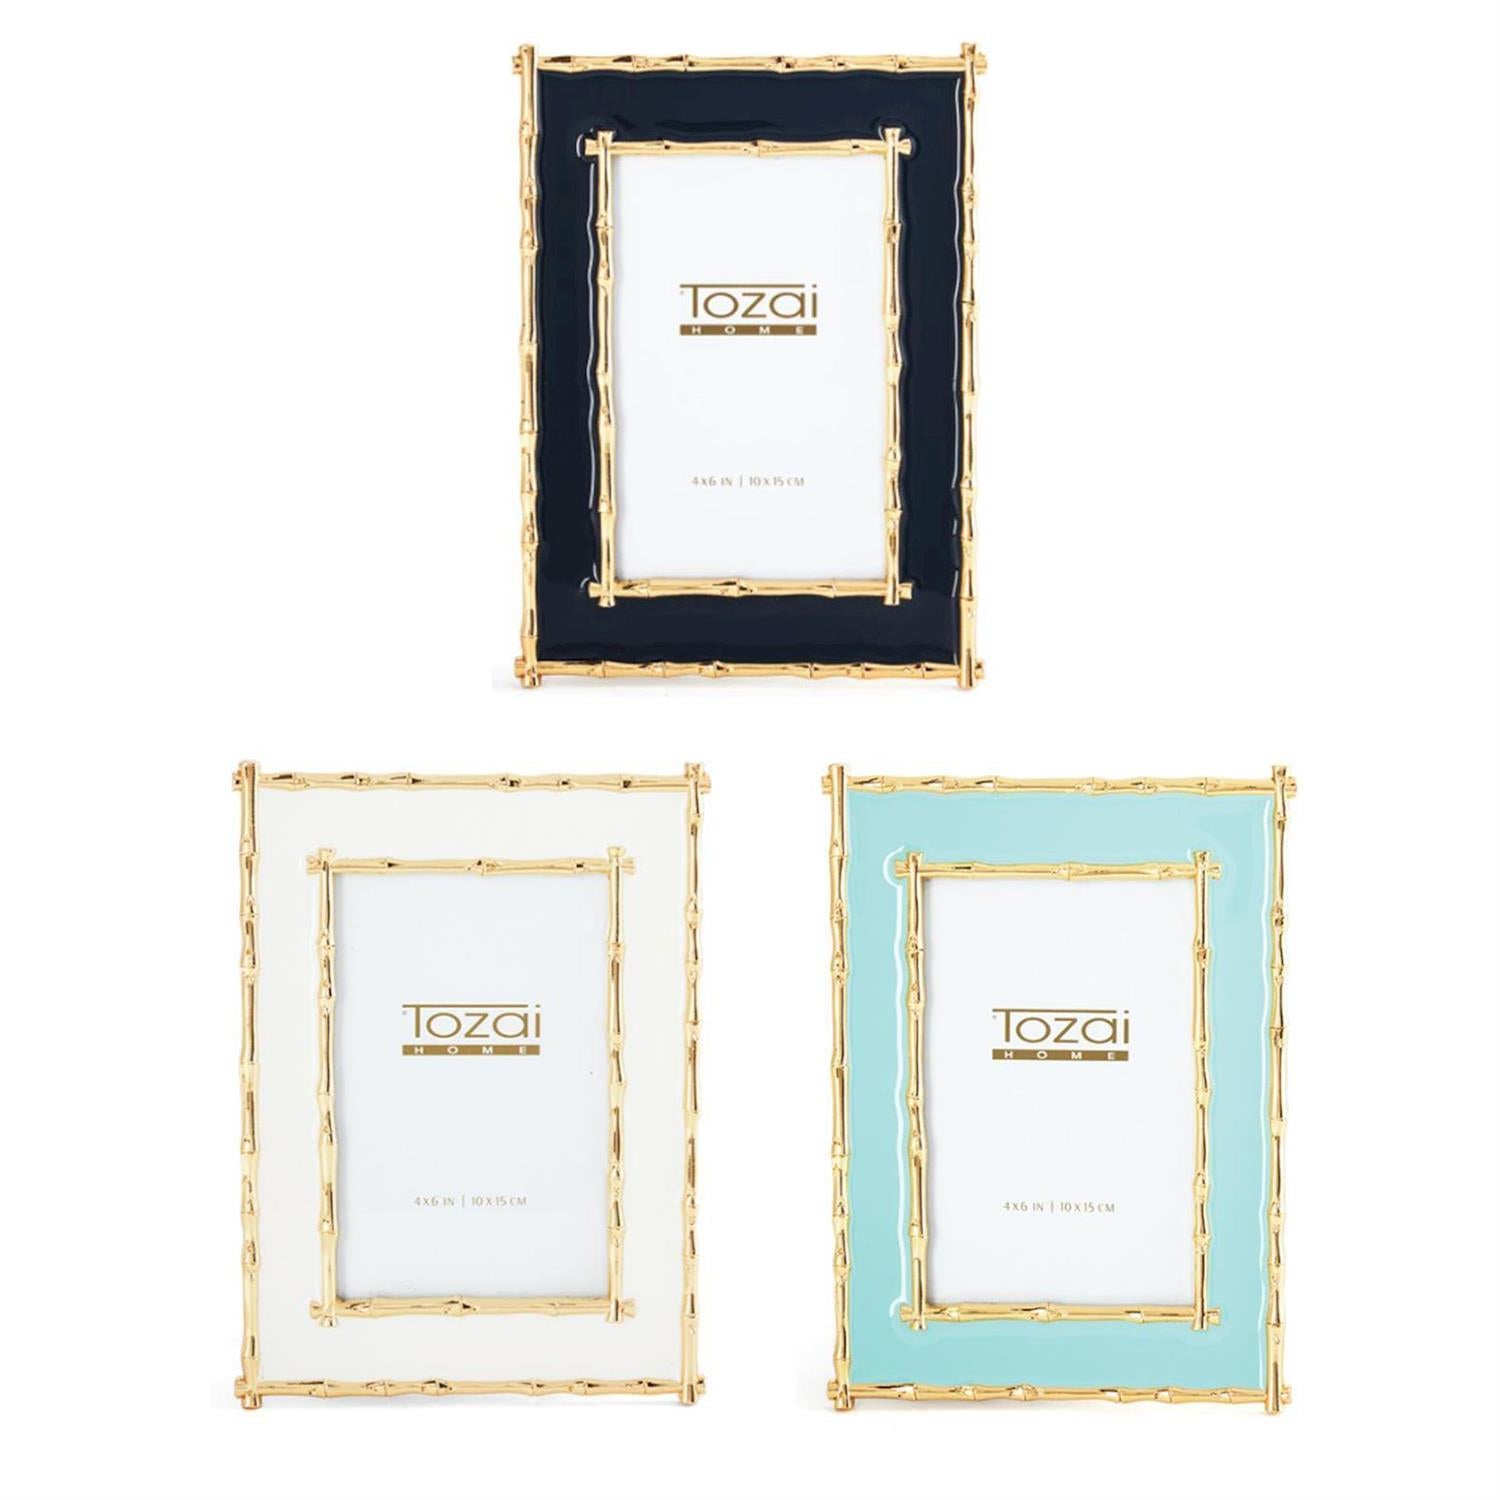 Brynn Gold Bamboo Border 4 x 6 Photo Frames in Assorted Colors